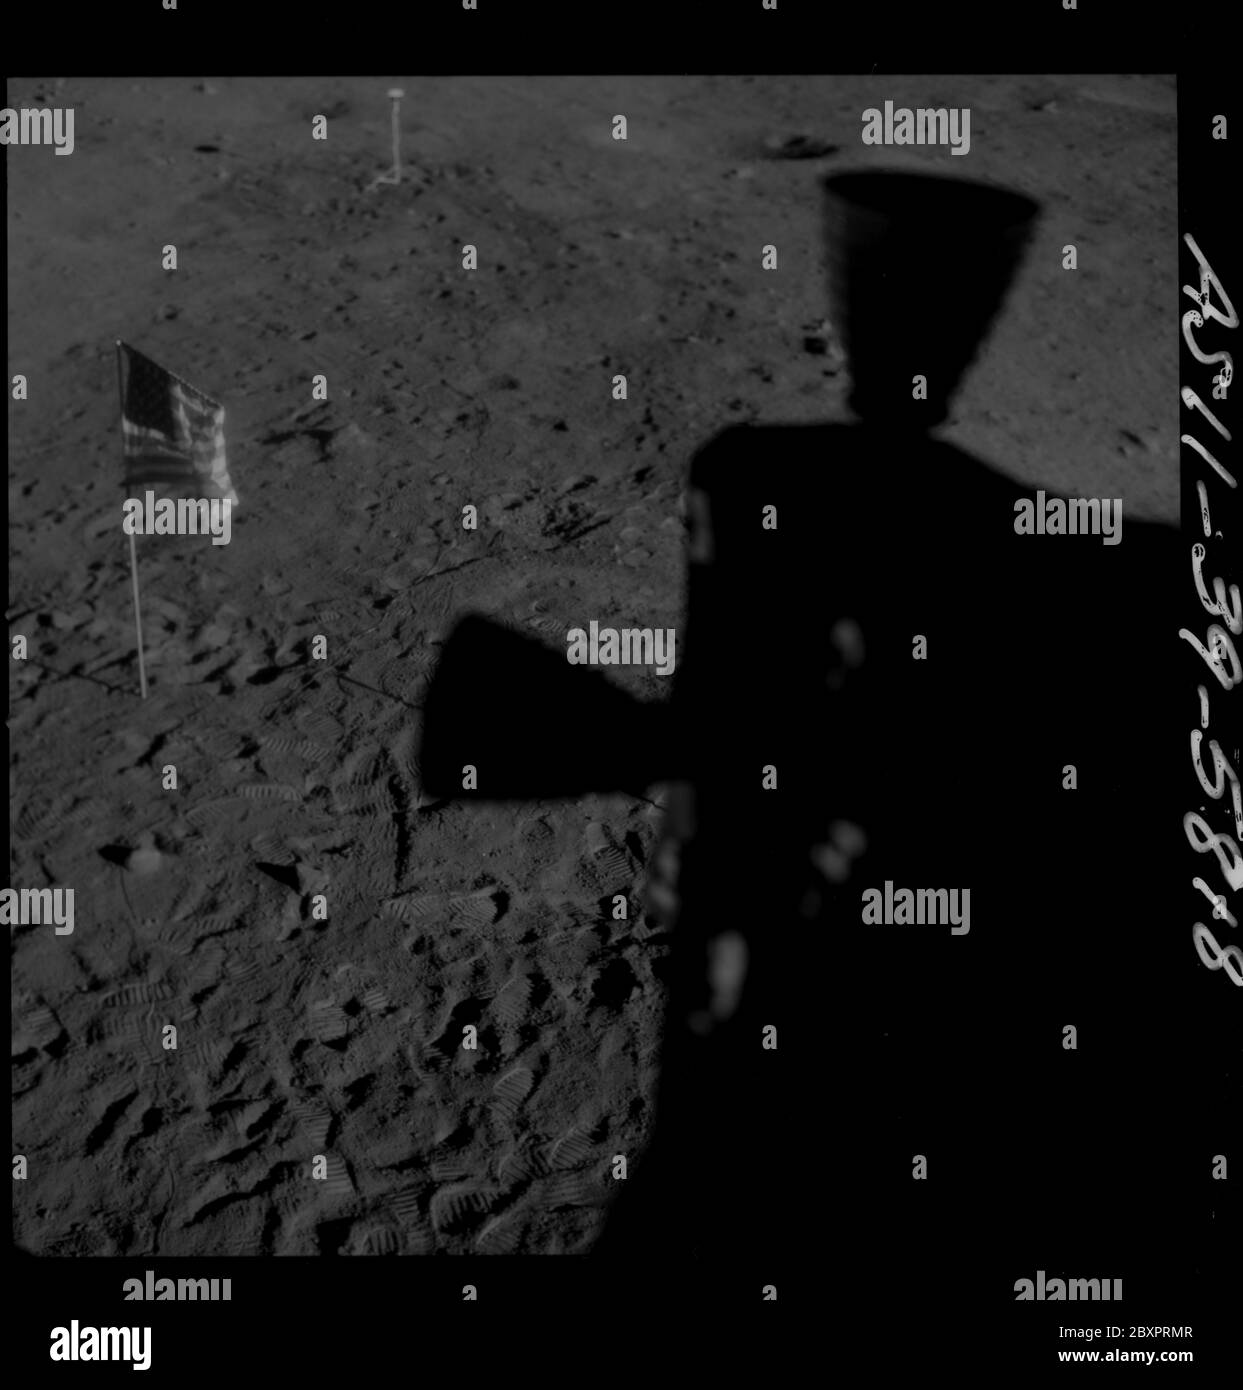 AS11-39-5818 - Apollo 11 - Apollo 11 Mission image - Shadow of LM thrusters and U.S. flag visible on lunar surface; Scope and content:  The original database describes this as: Description: Shadow of Lunar Module (LM) thrusters visible on lunar surface. United States (U.S.) flag visible also. Image taken from inside the LM after landing at Tranquility Base during the Apollo 11 Mission. Original film magazine was labeled Q.  Film Type: SO 3400 Panatomic-X Black/White taken with an 80mm lens.  Sun angle is Low. Approximate tilt angle is Low. Image was used to make a panoramic view of the moon. S Stock Photo